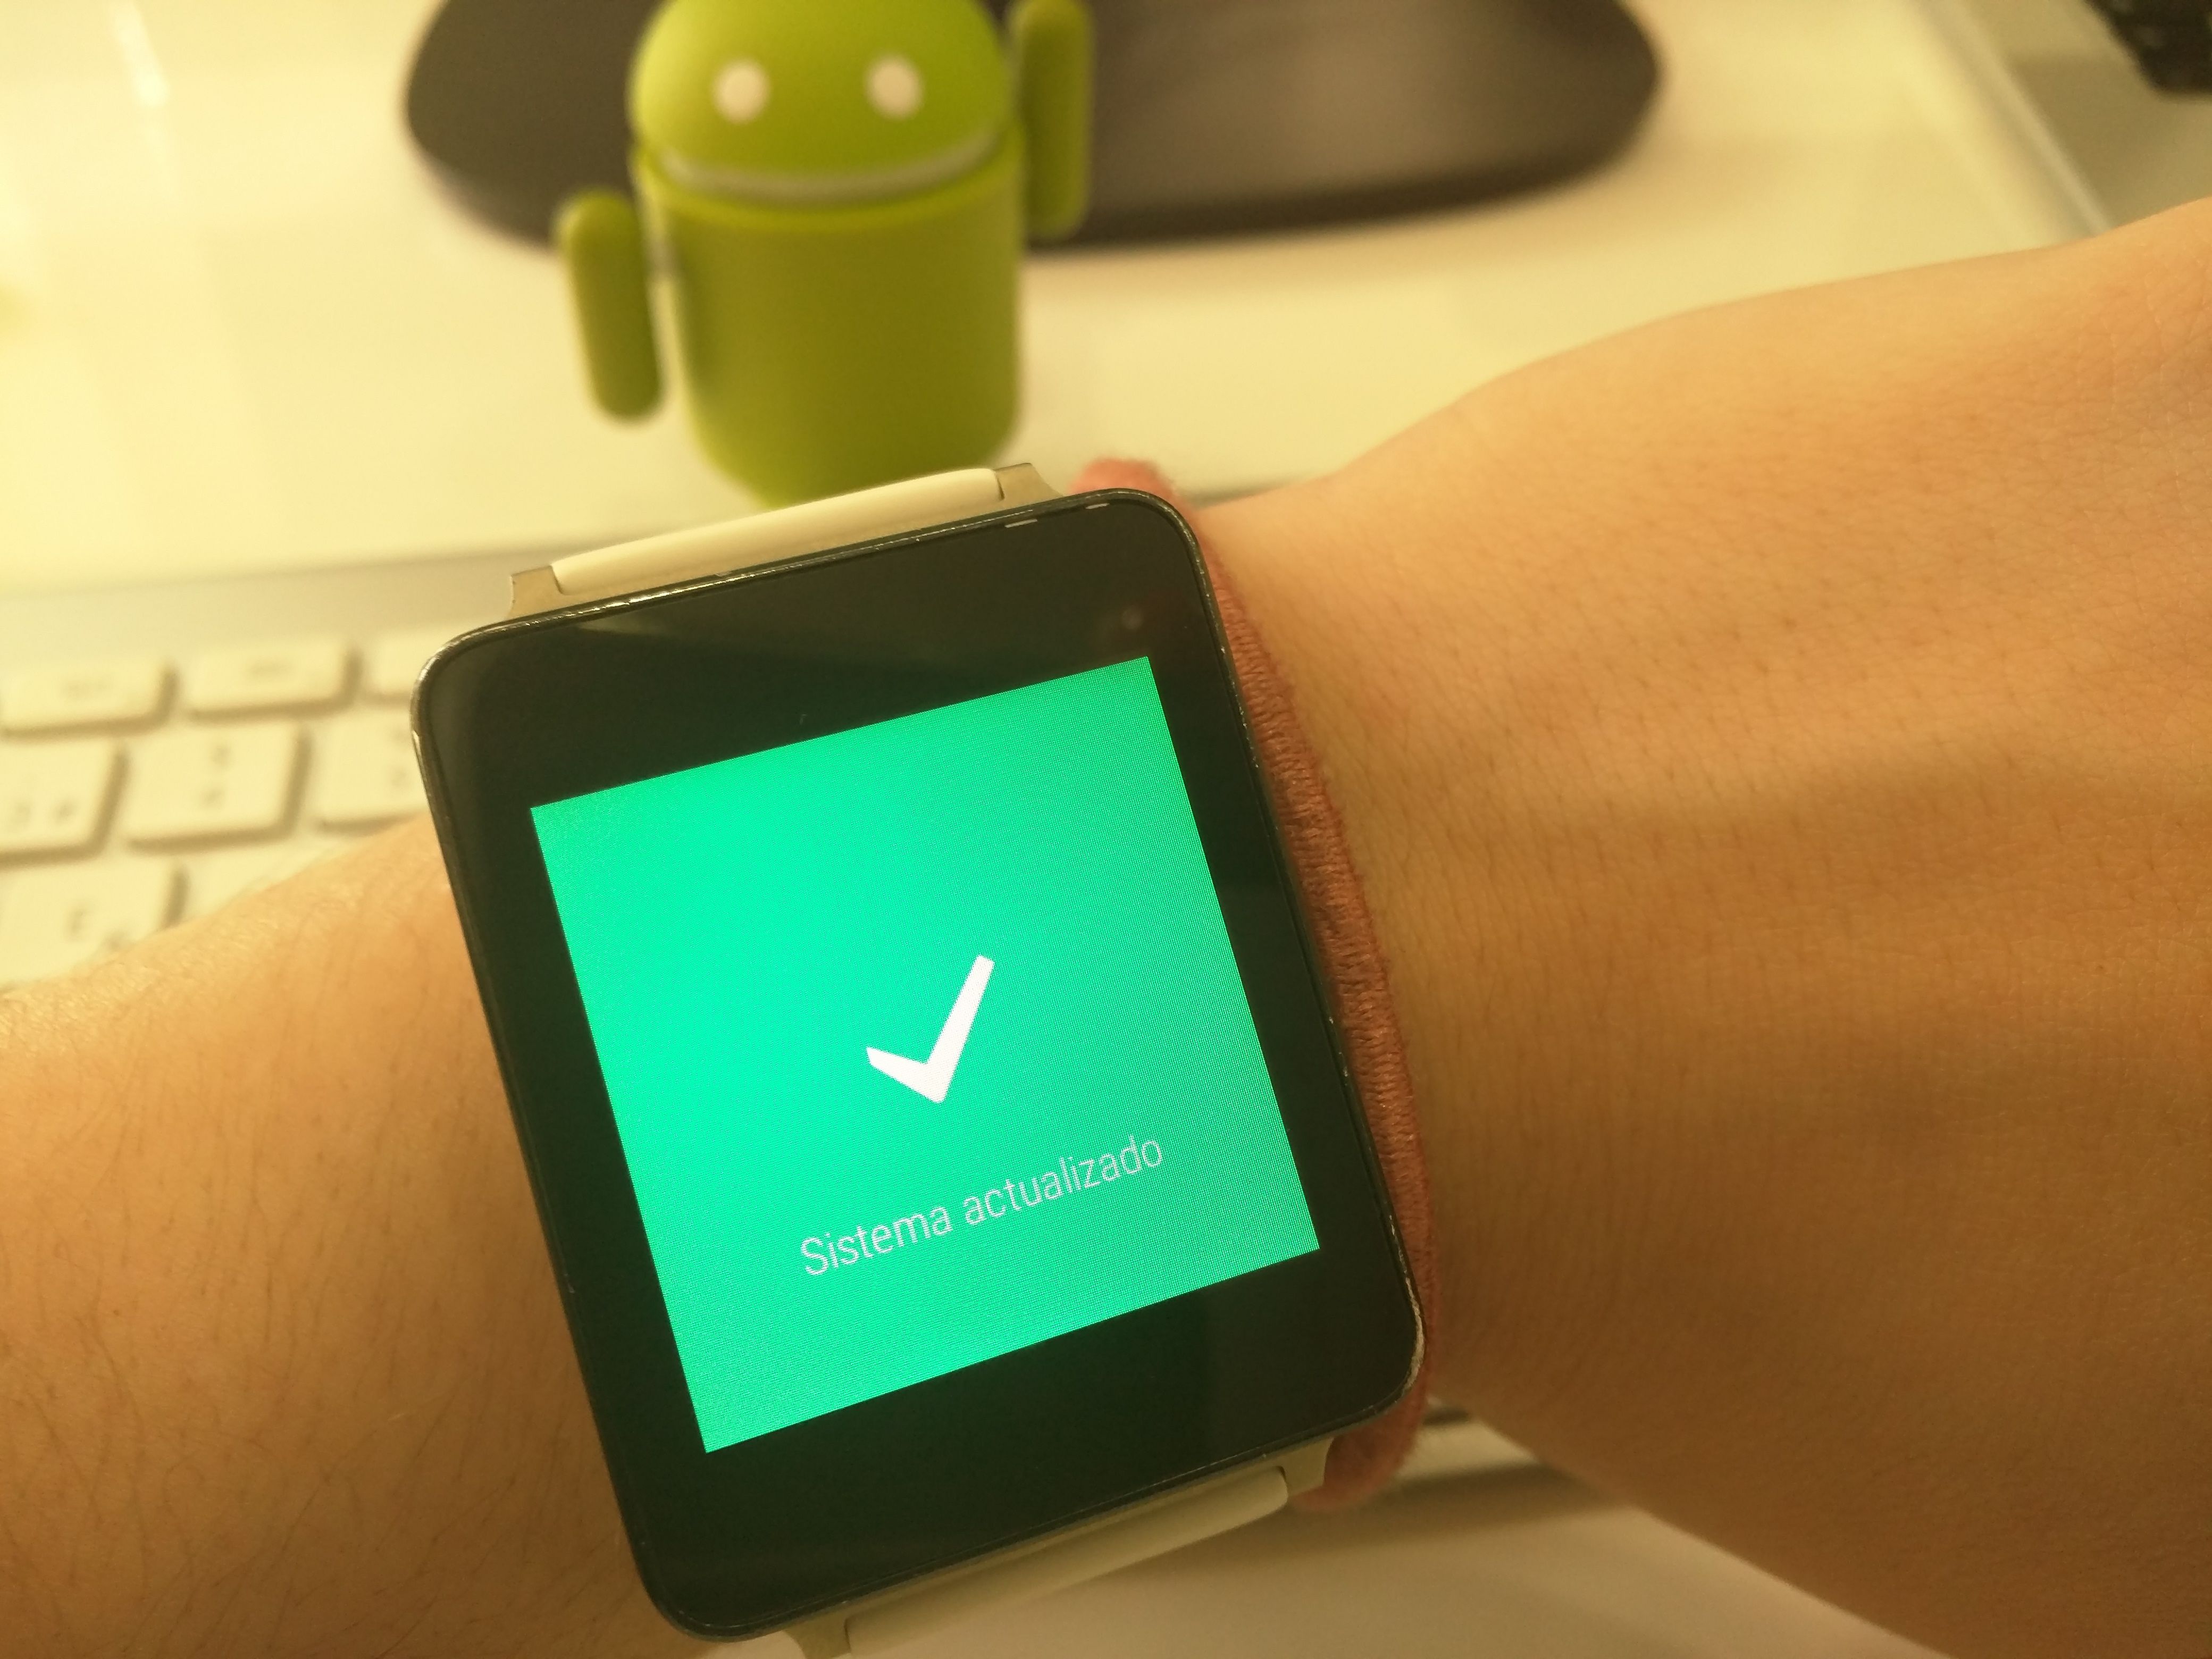 Update-LG-G-Watch-Android-Wear-5.1.1